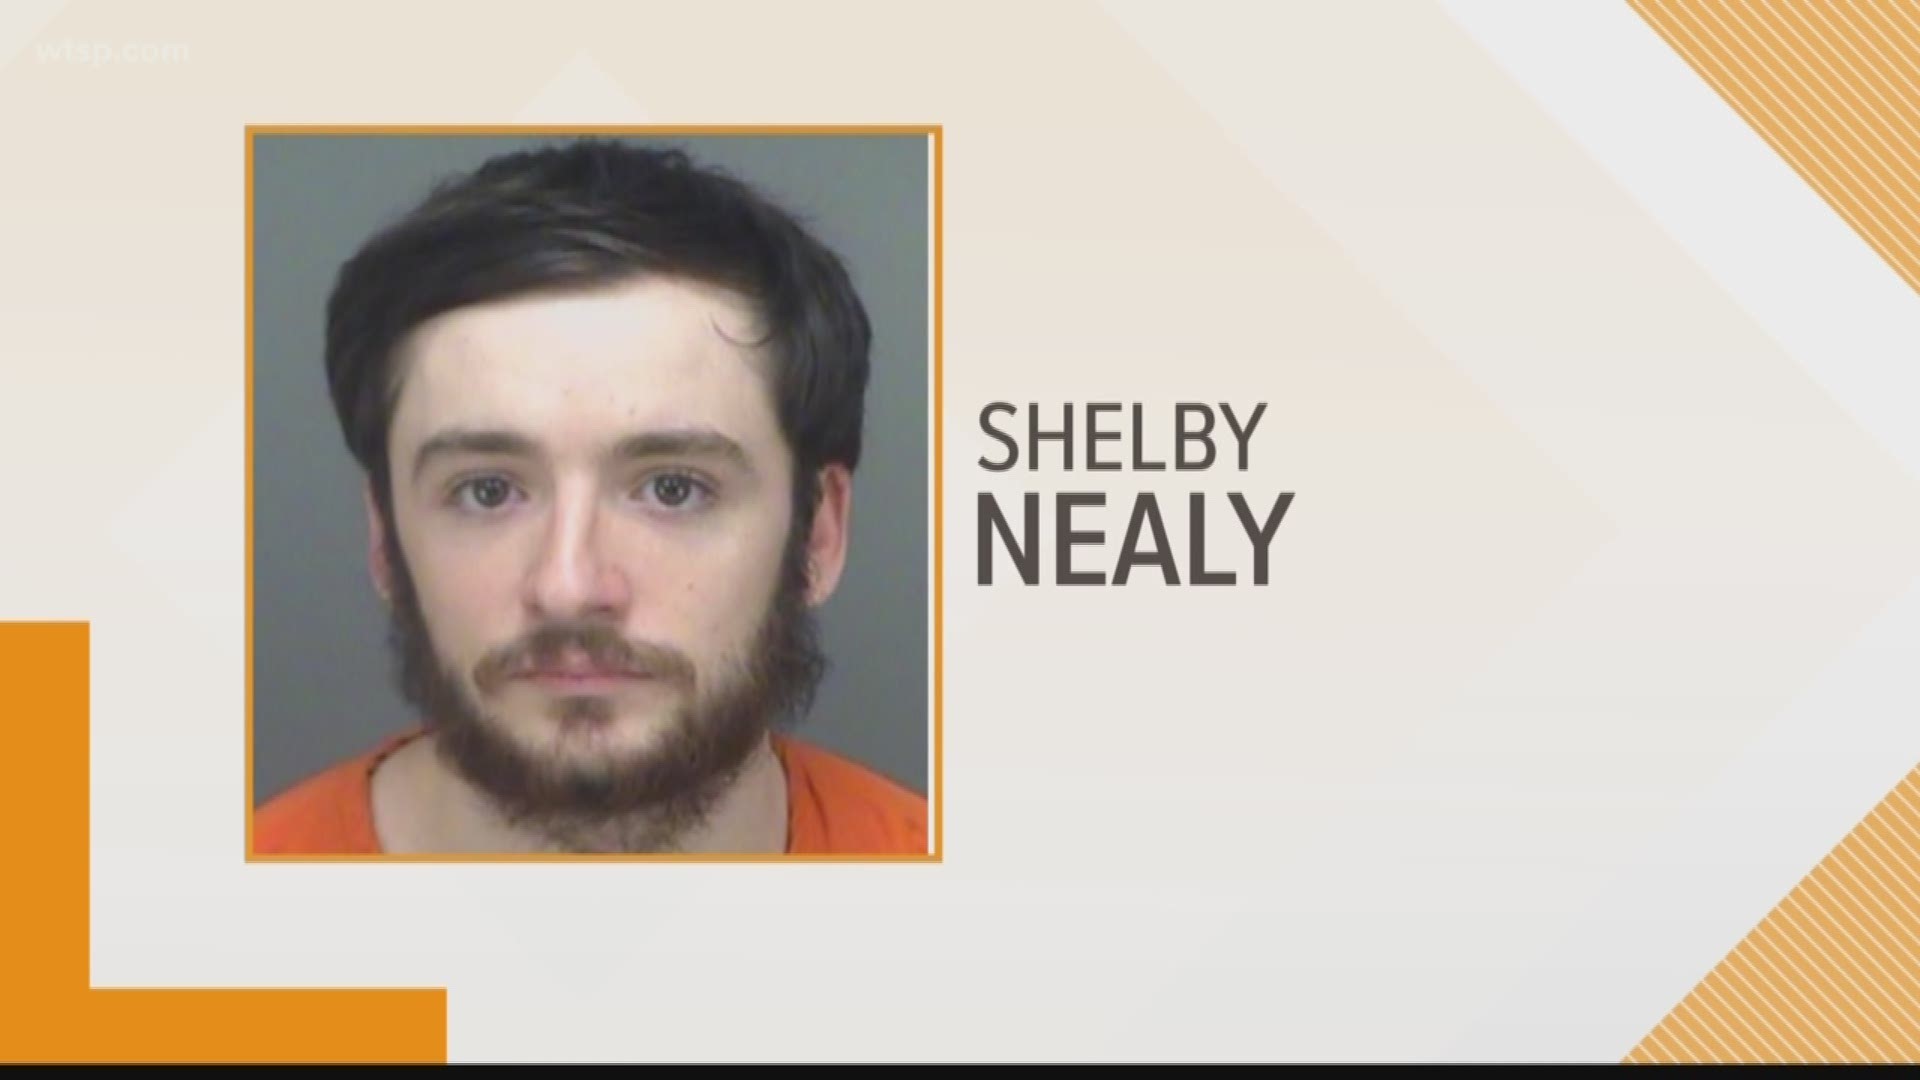 Shelby John Nealy, accused of killing his wife and three in-laws, was booked Saturday into the Pinellas County Jail to face several murder charges.